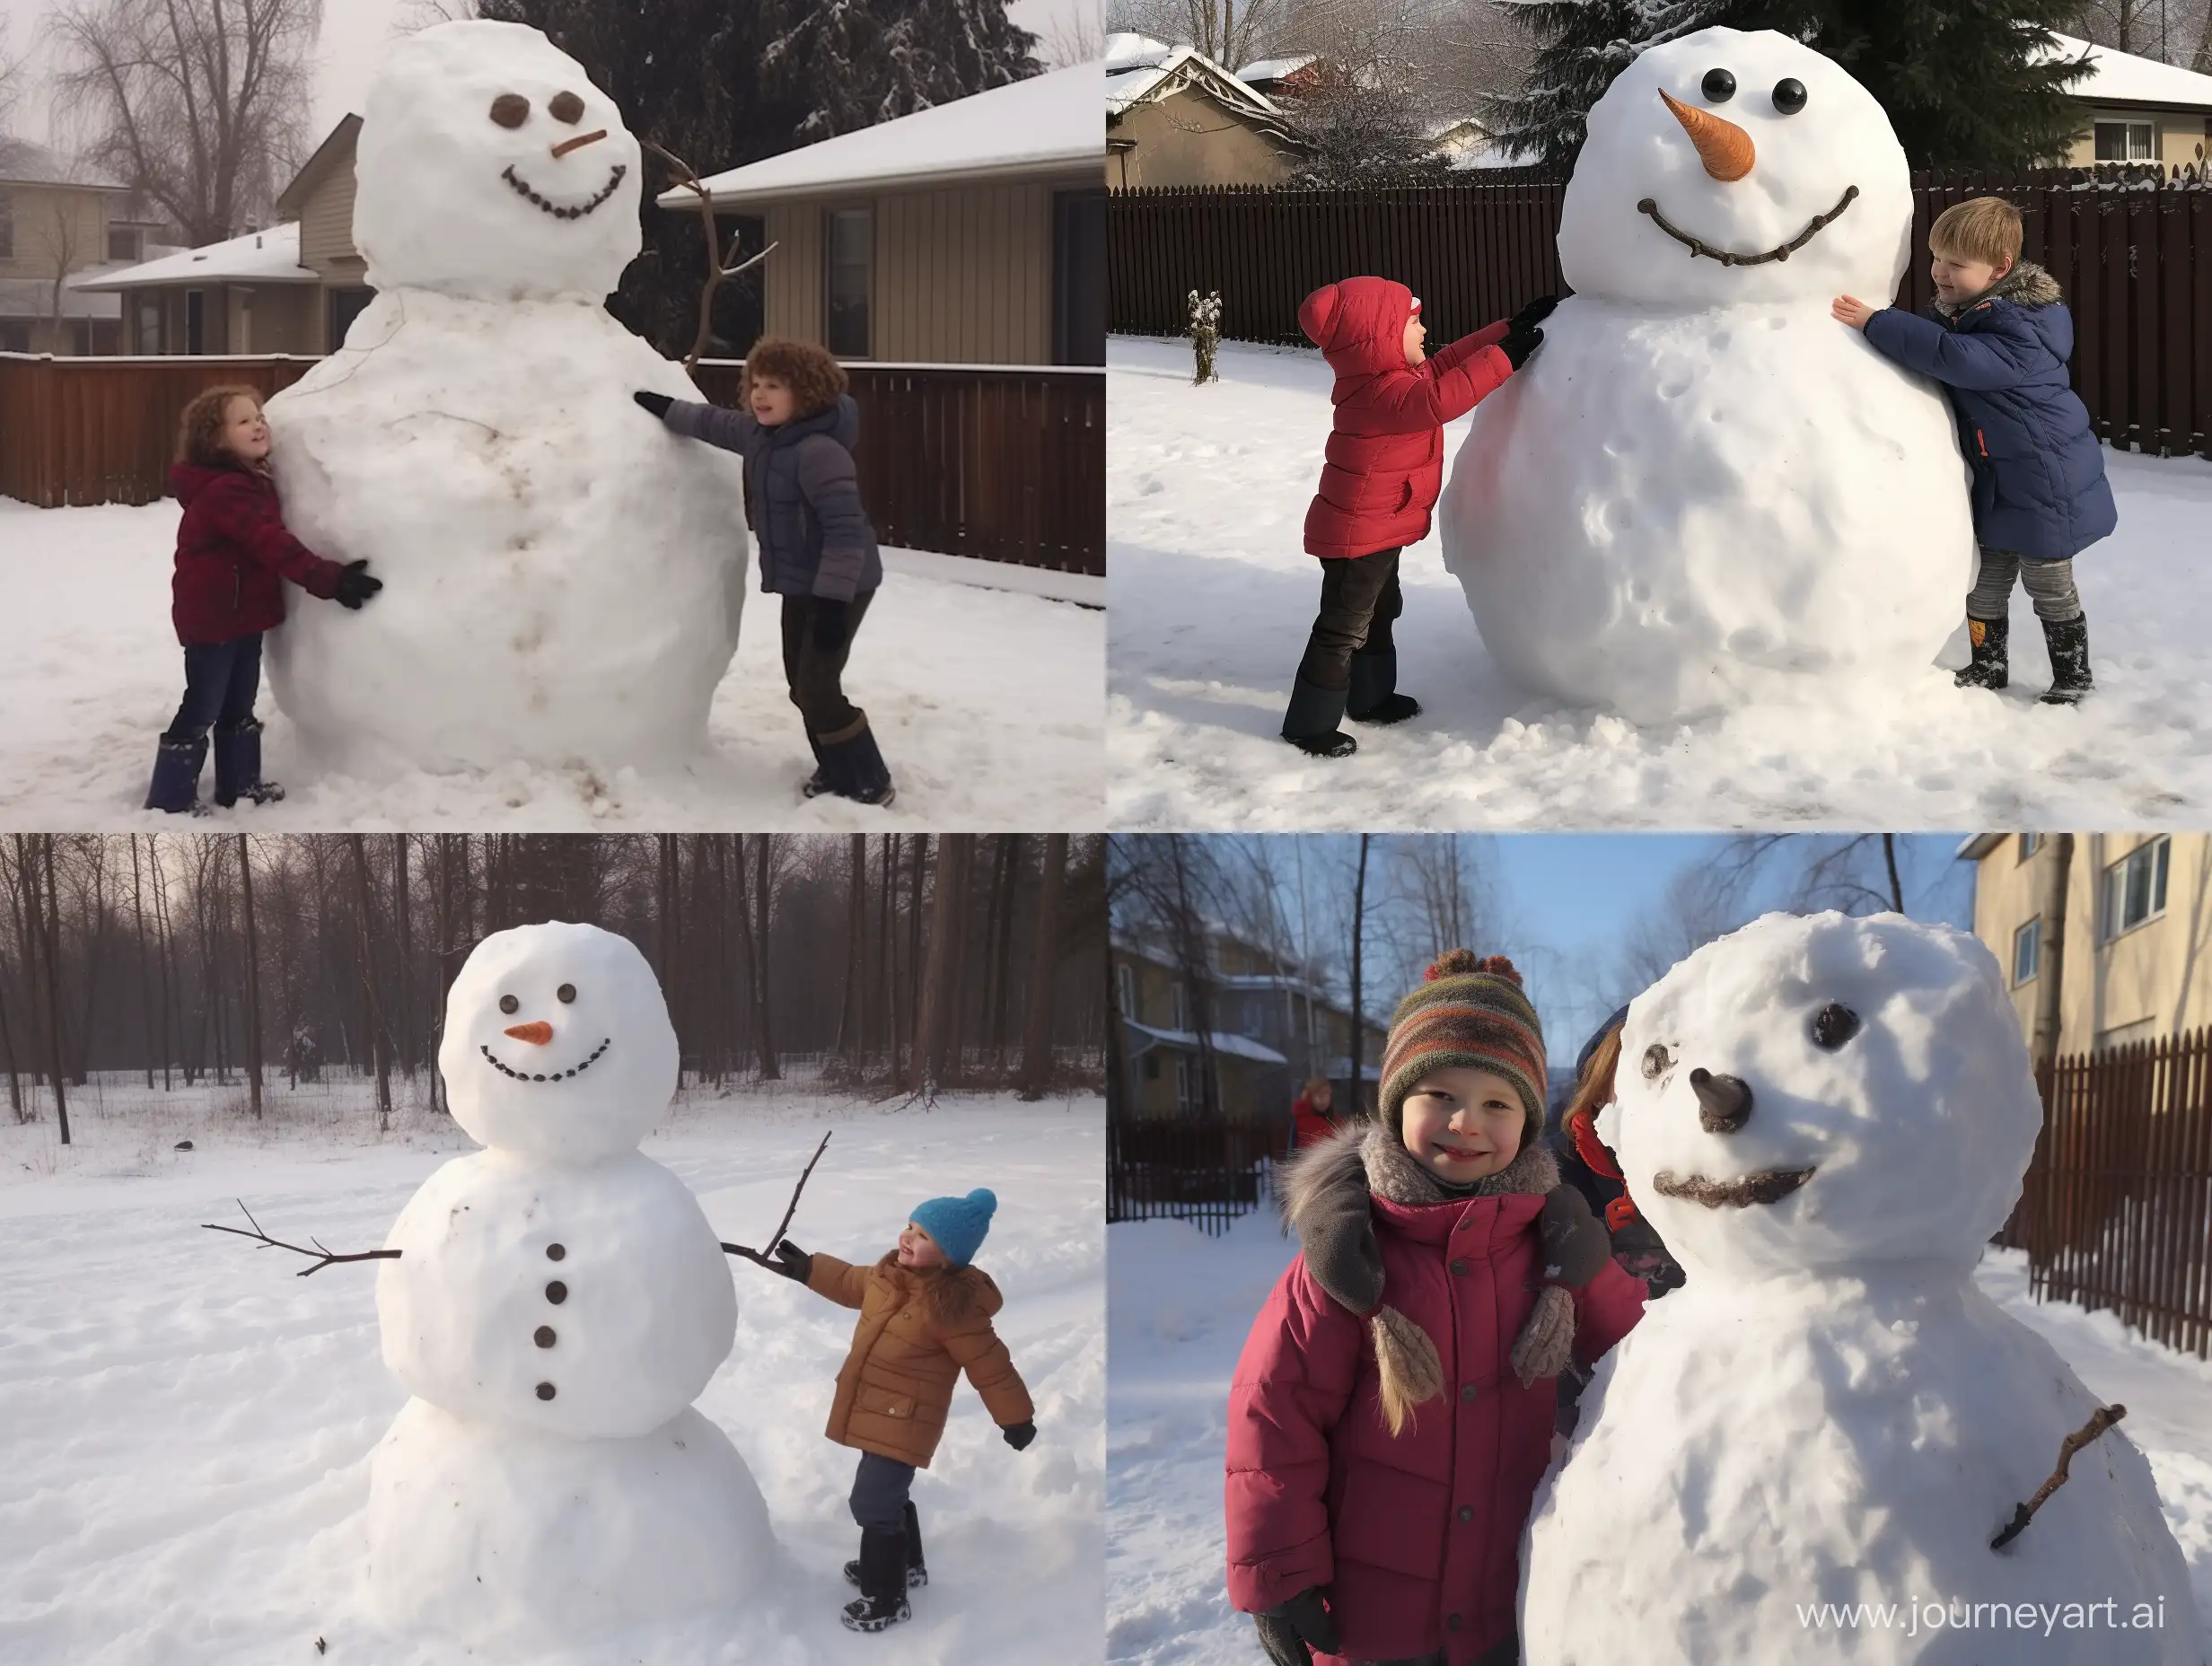 Children make a big snowman in the yard of the house